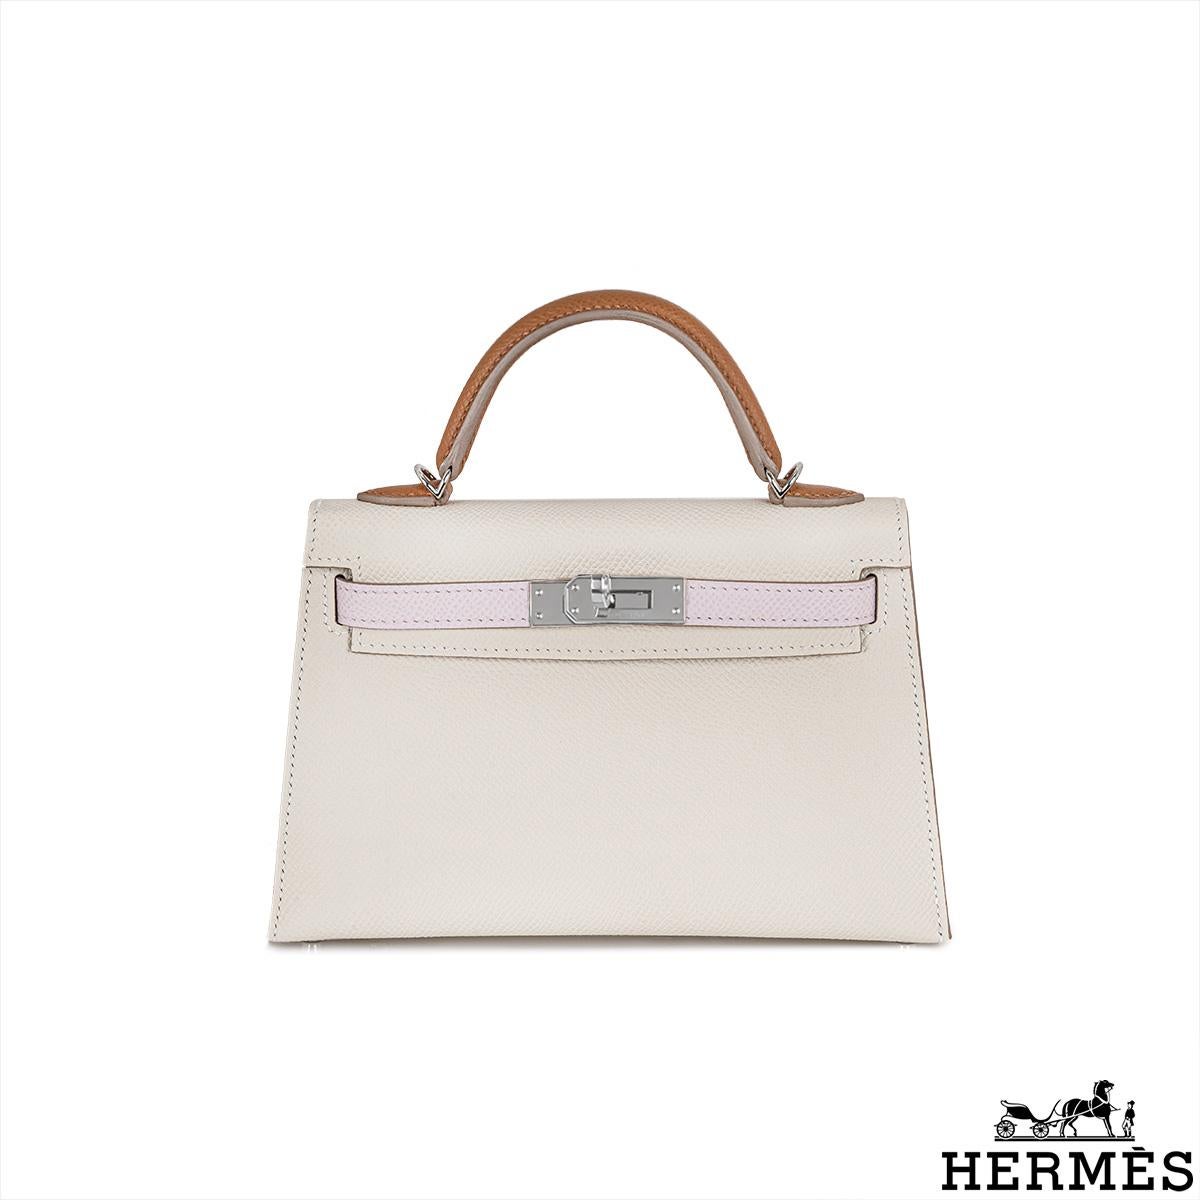 A gorgeous Hermès Kelly Mini II Tricolore Verso handbag. The exterior of this Kelly Mini features Craie, Mauve Pale and Gold Veau Epsom leather and is complemented by palladium hardware and tonal stitchings. It has a front toggle closure with two